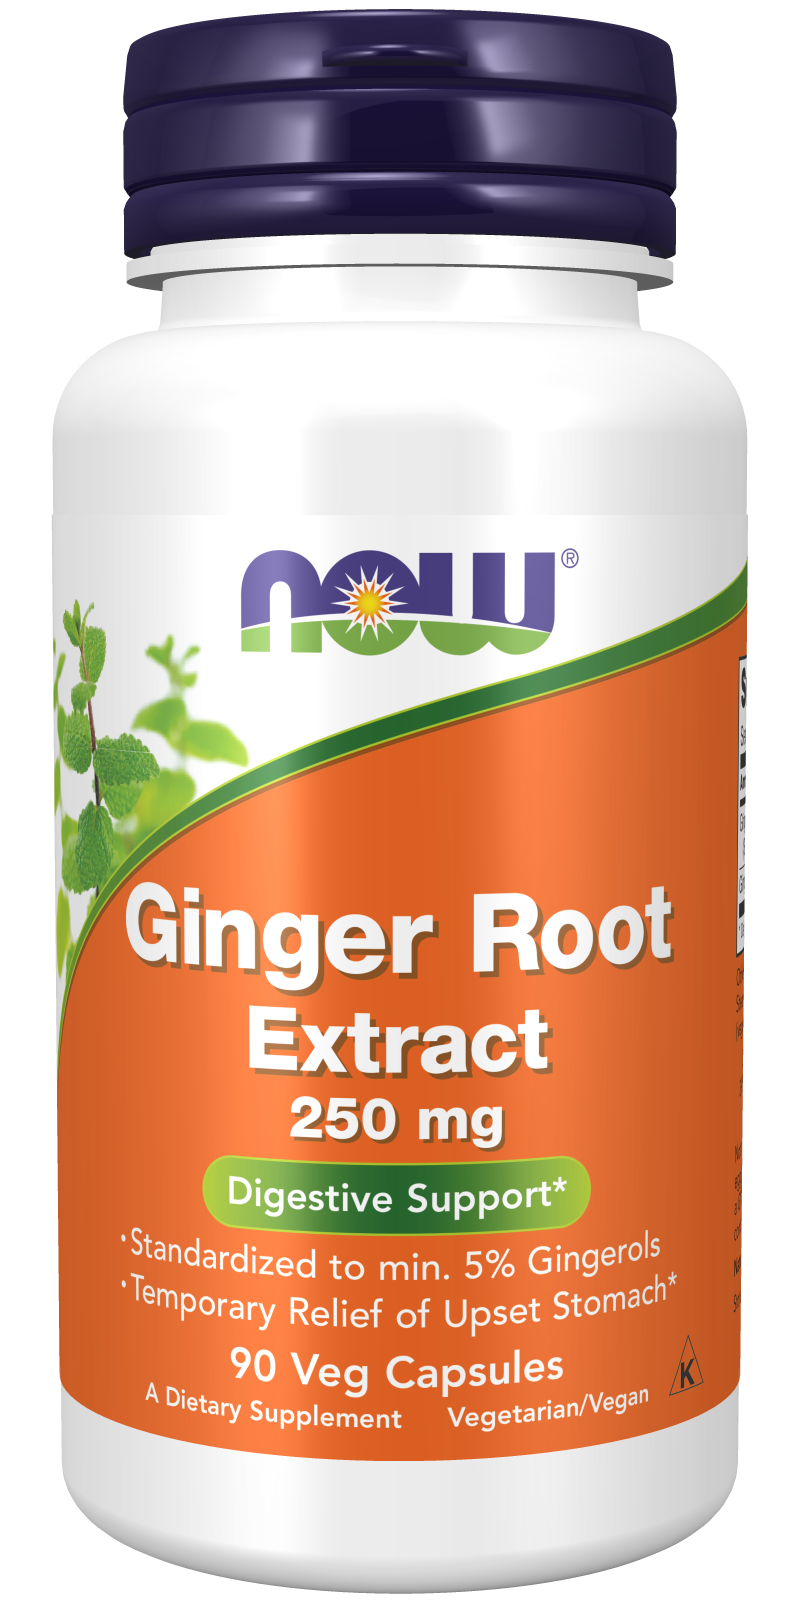 Ginger Root Extract 250 mg - 90 Veg Capsules Bottle Front